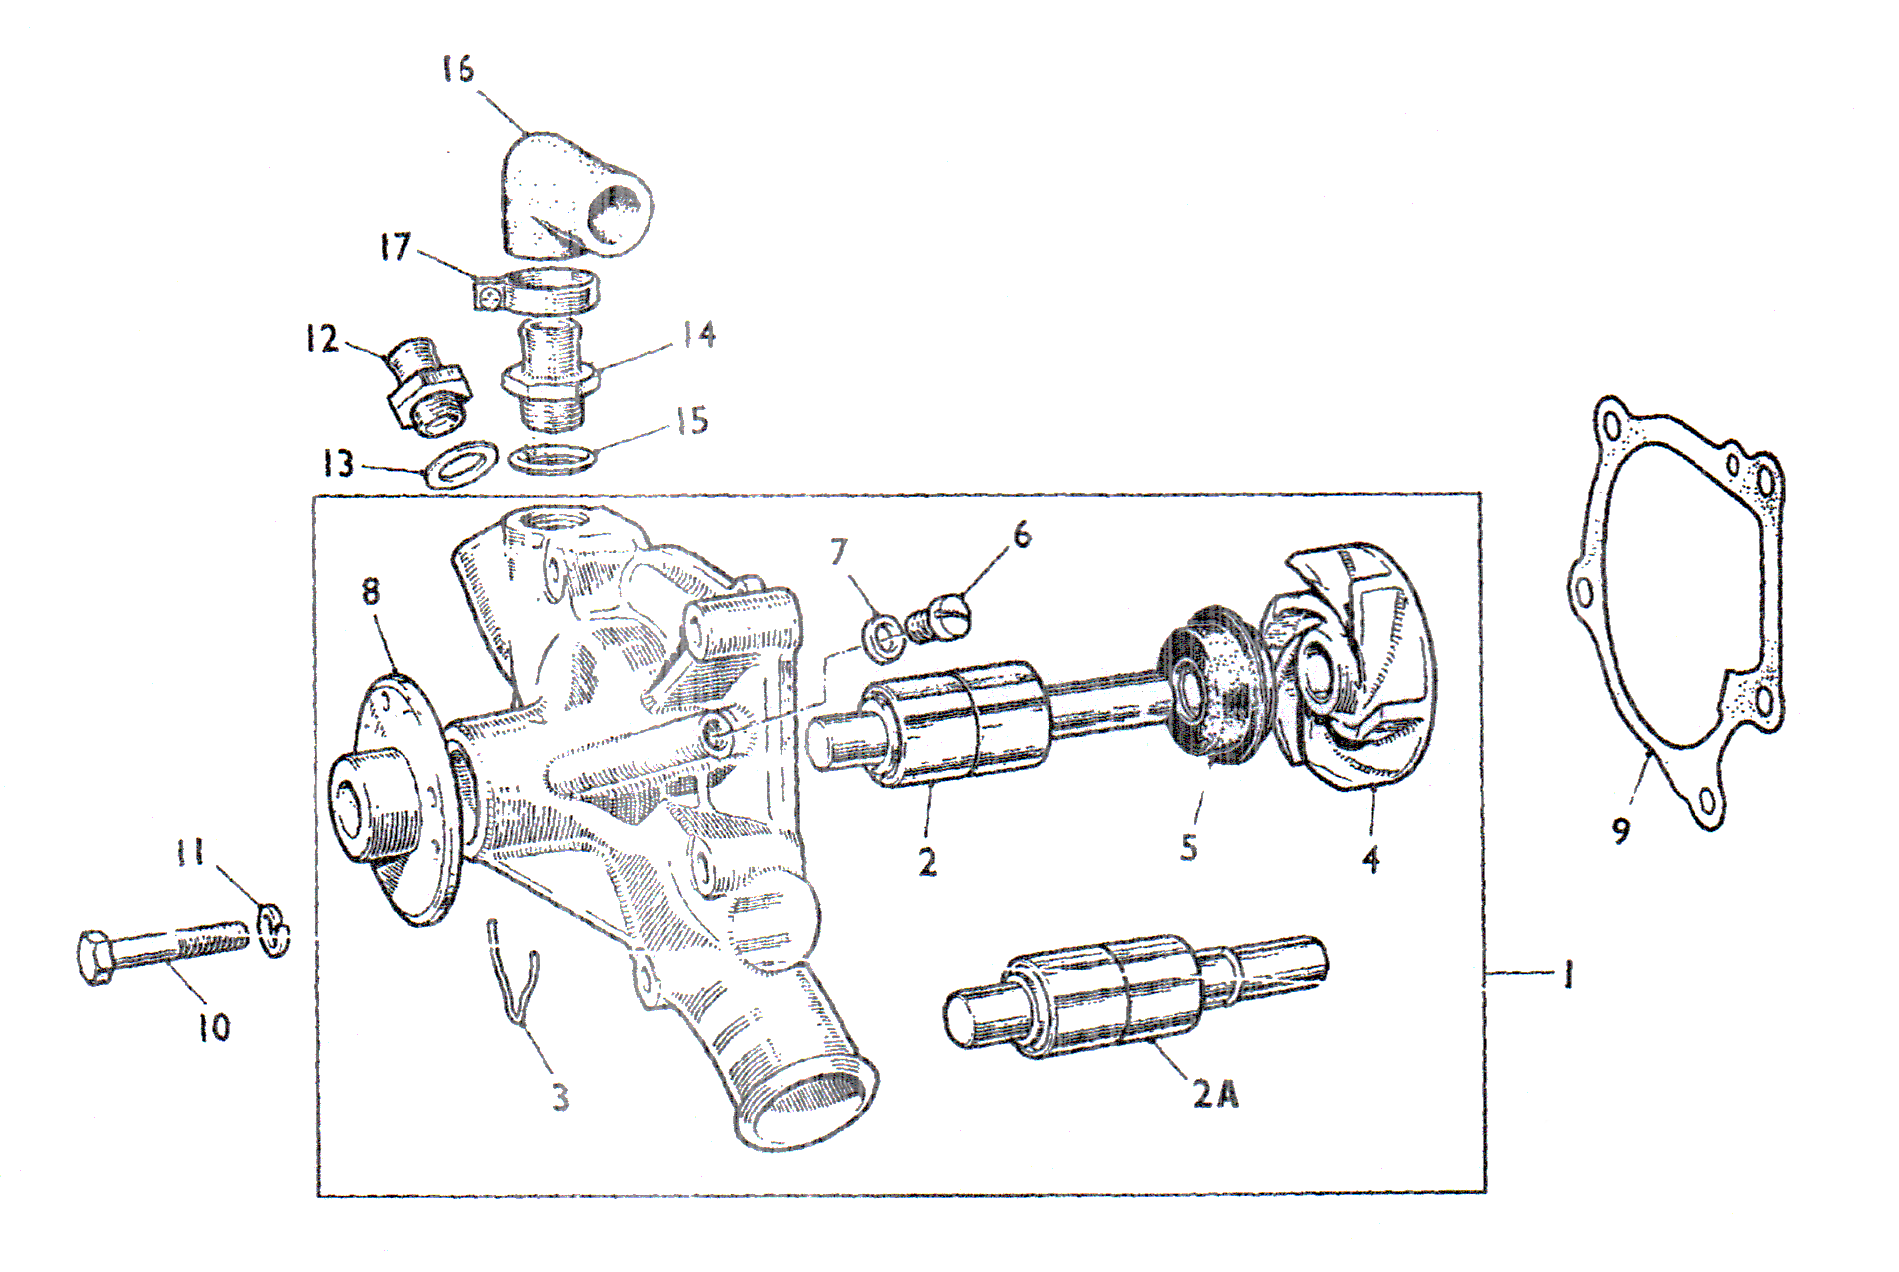 Details about   Water Pump For MG MGC 6 Cylinder 1967-1969